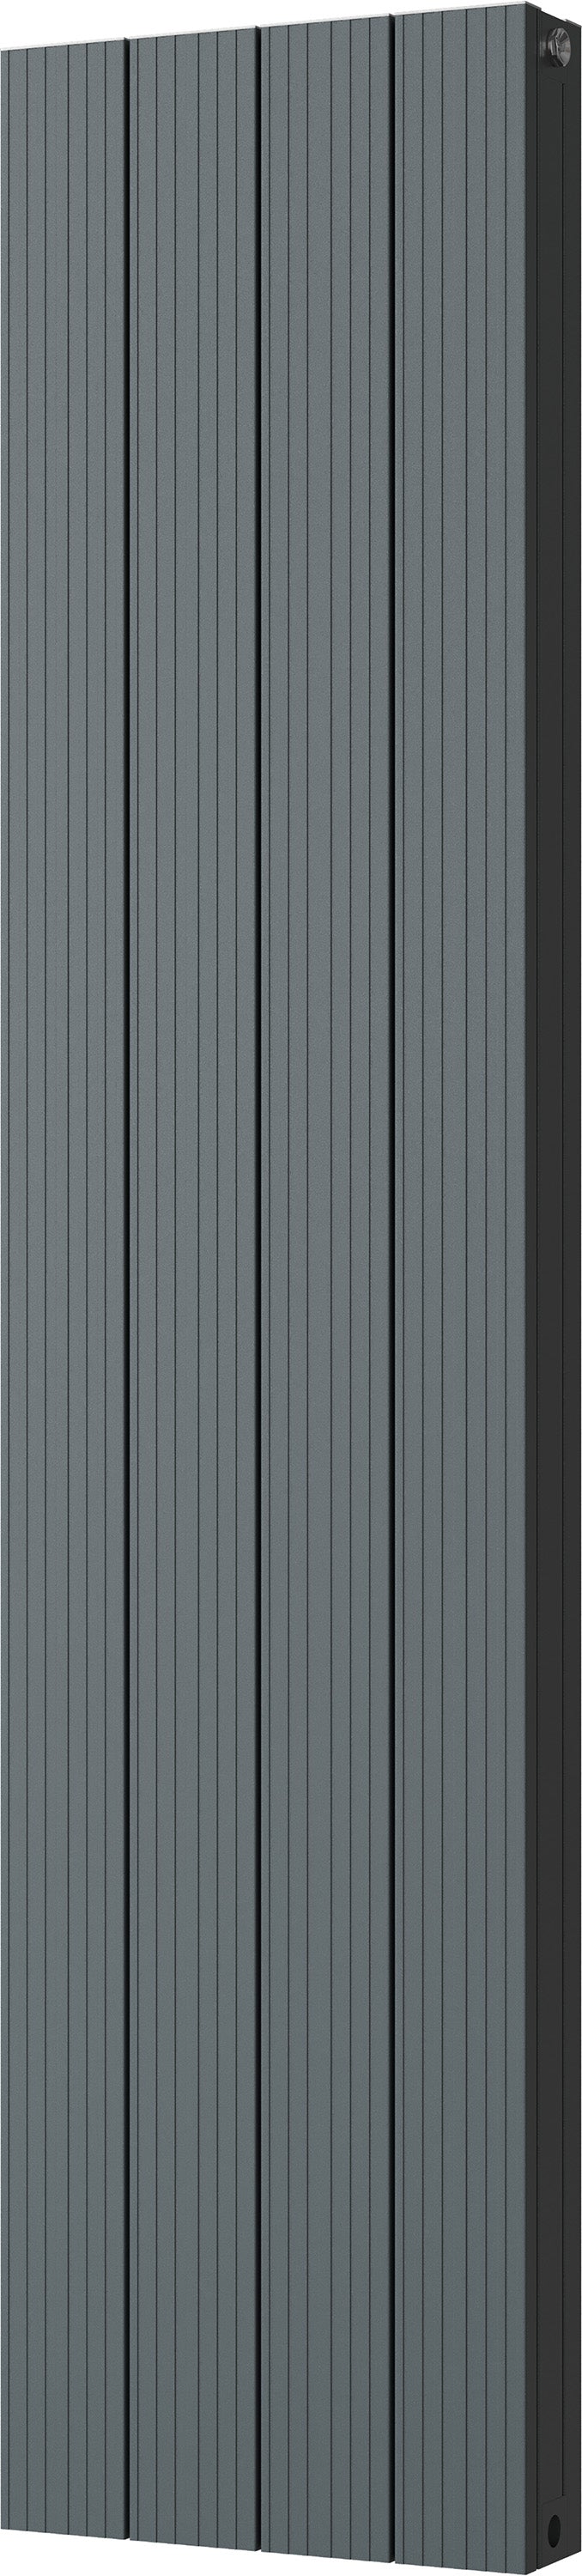 Thetford - Anthracite Vertical Radiator H1600mm x W372mm Grooved